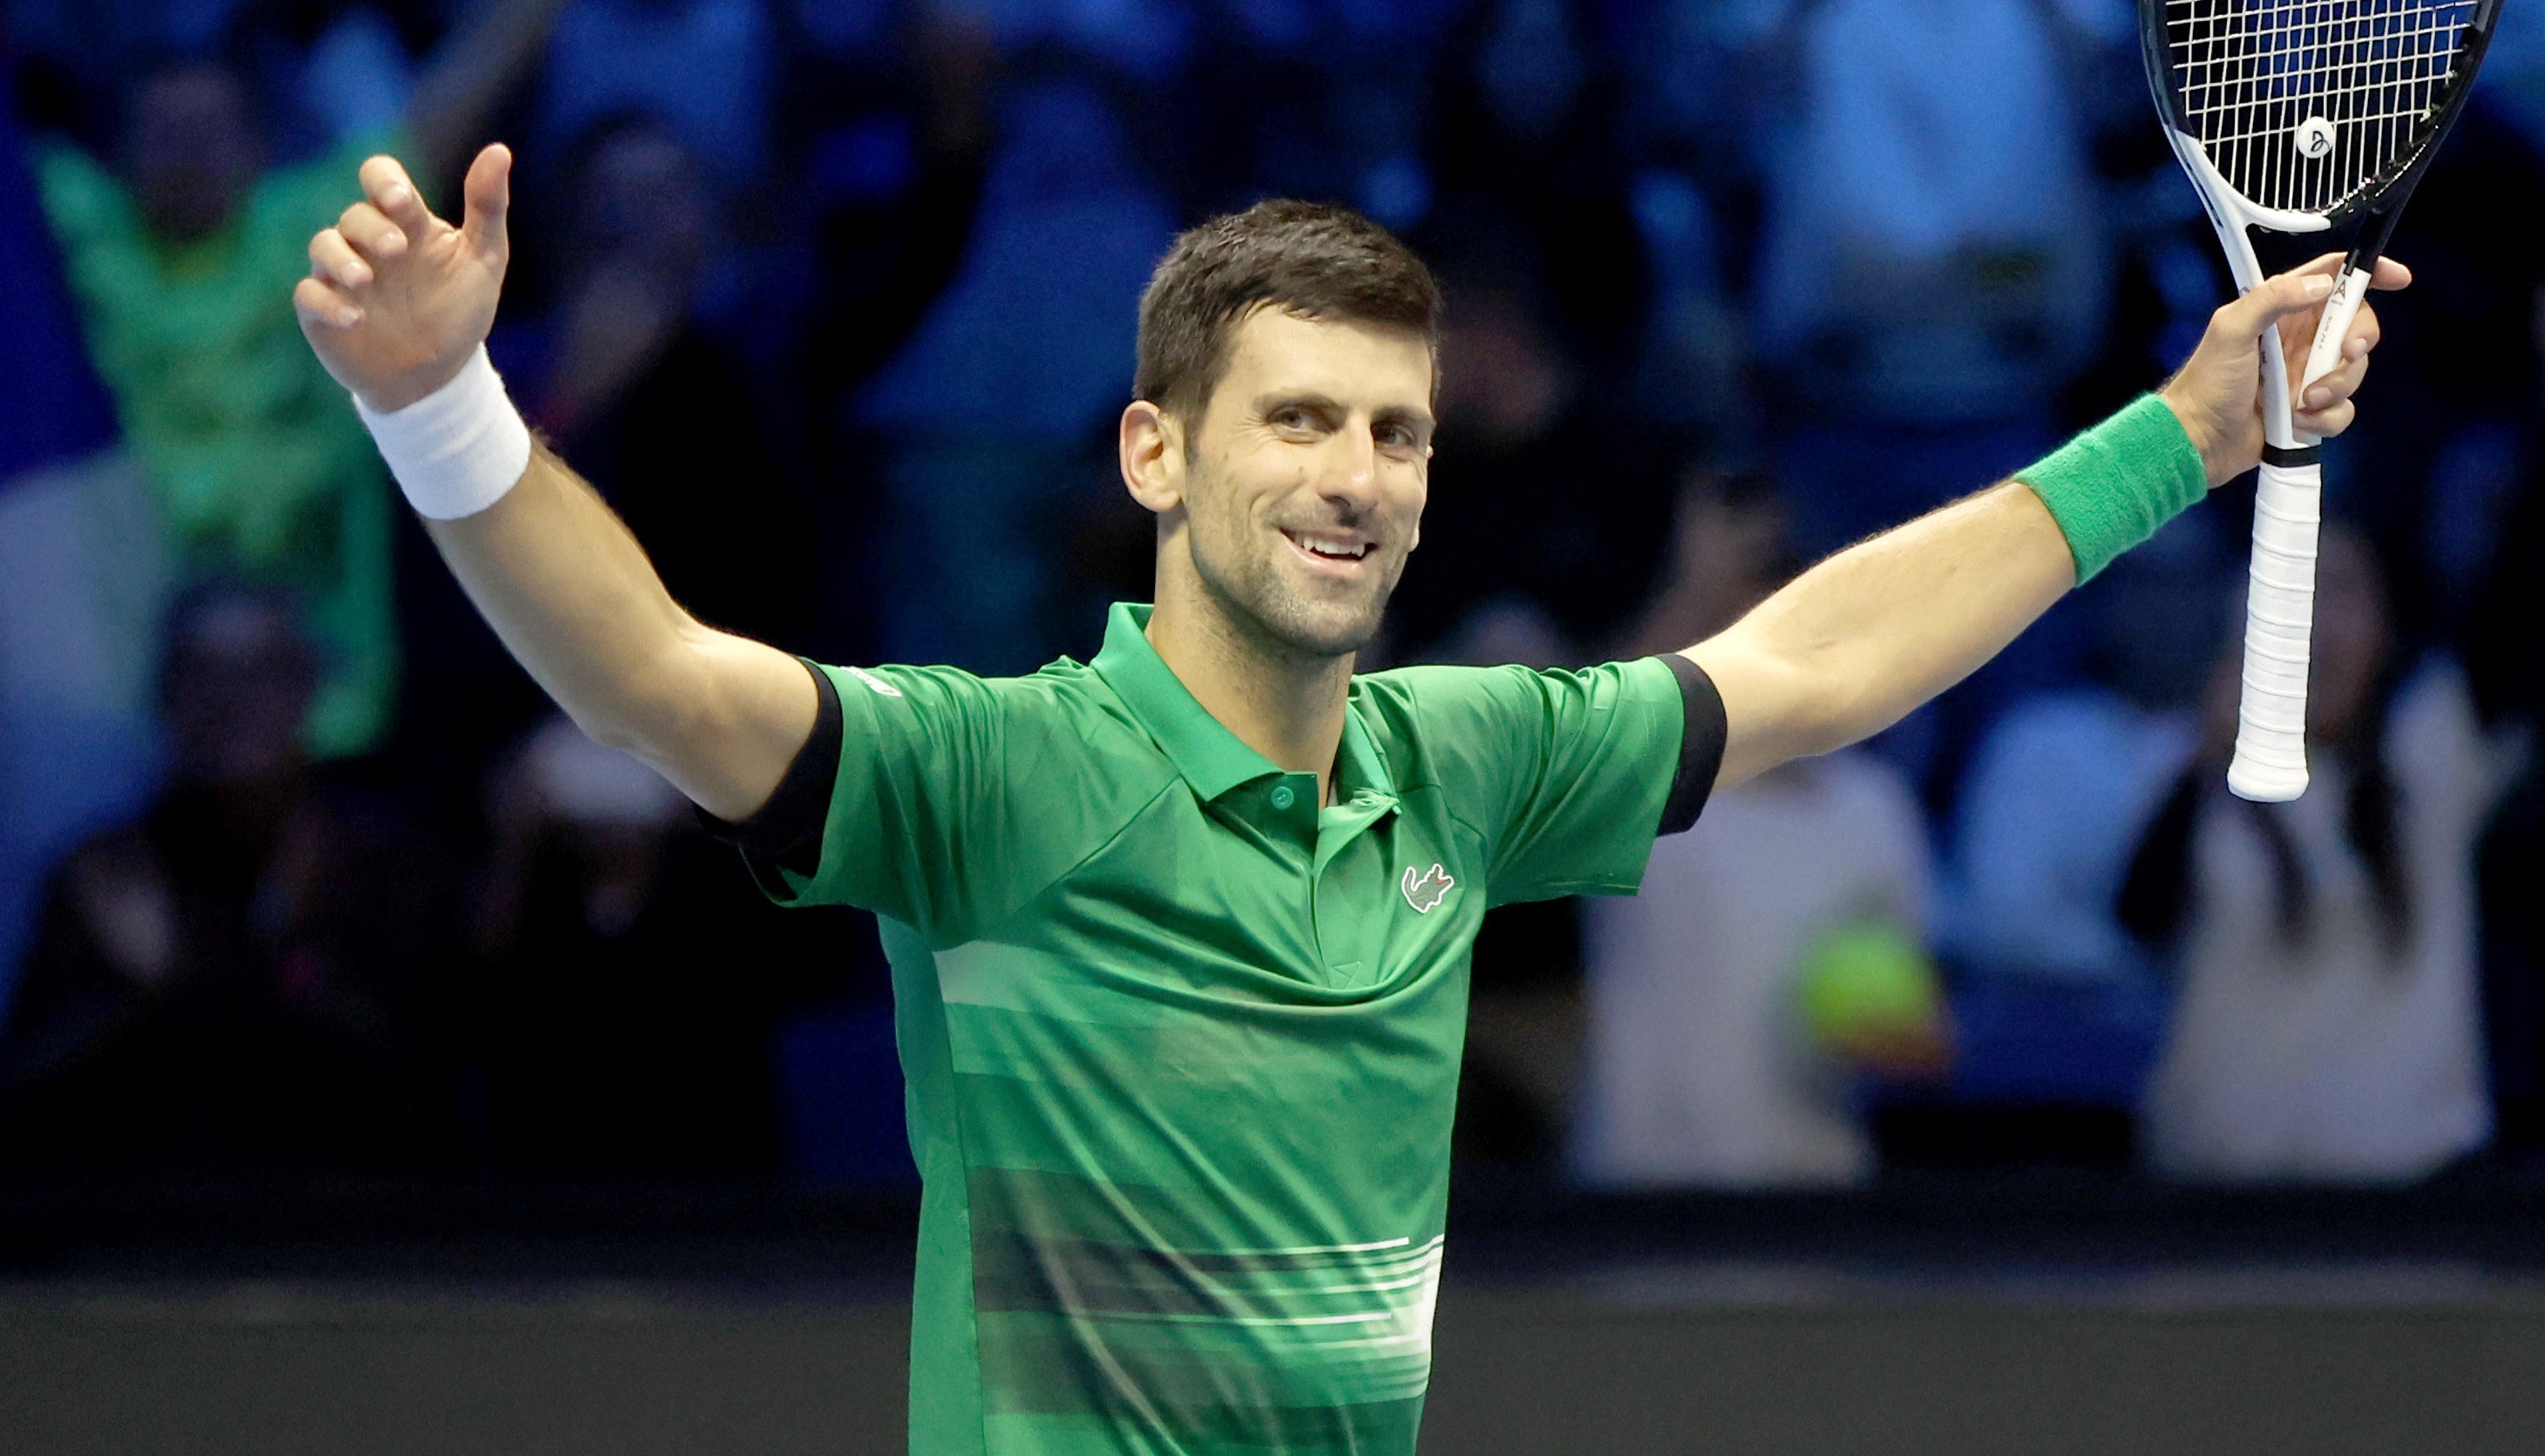 Novak caps 2022 season with reassertion of excellence in perfect title run